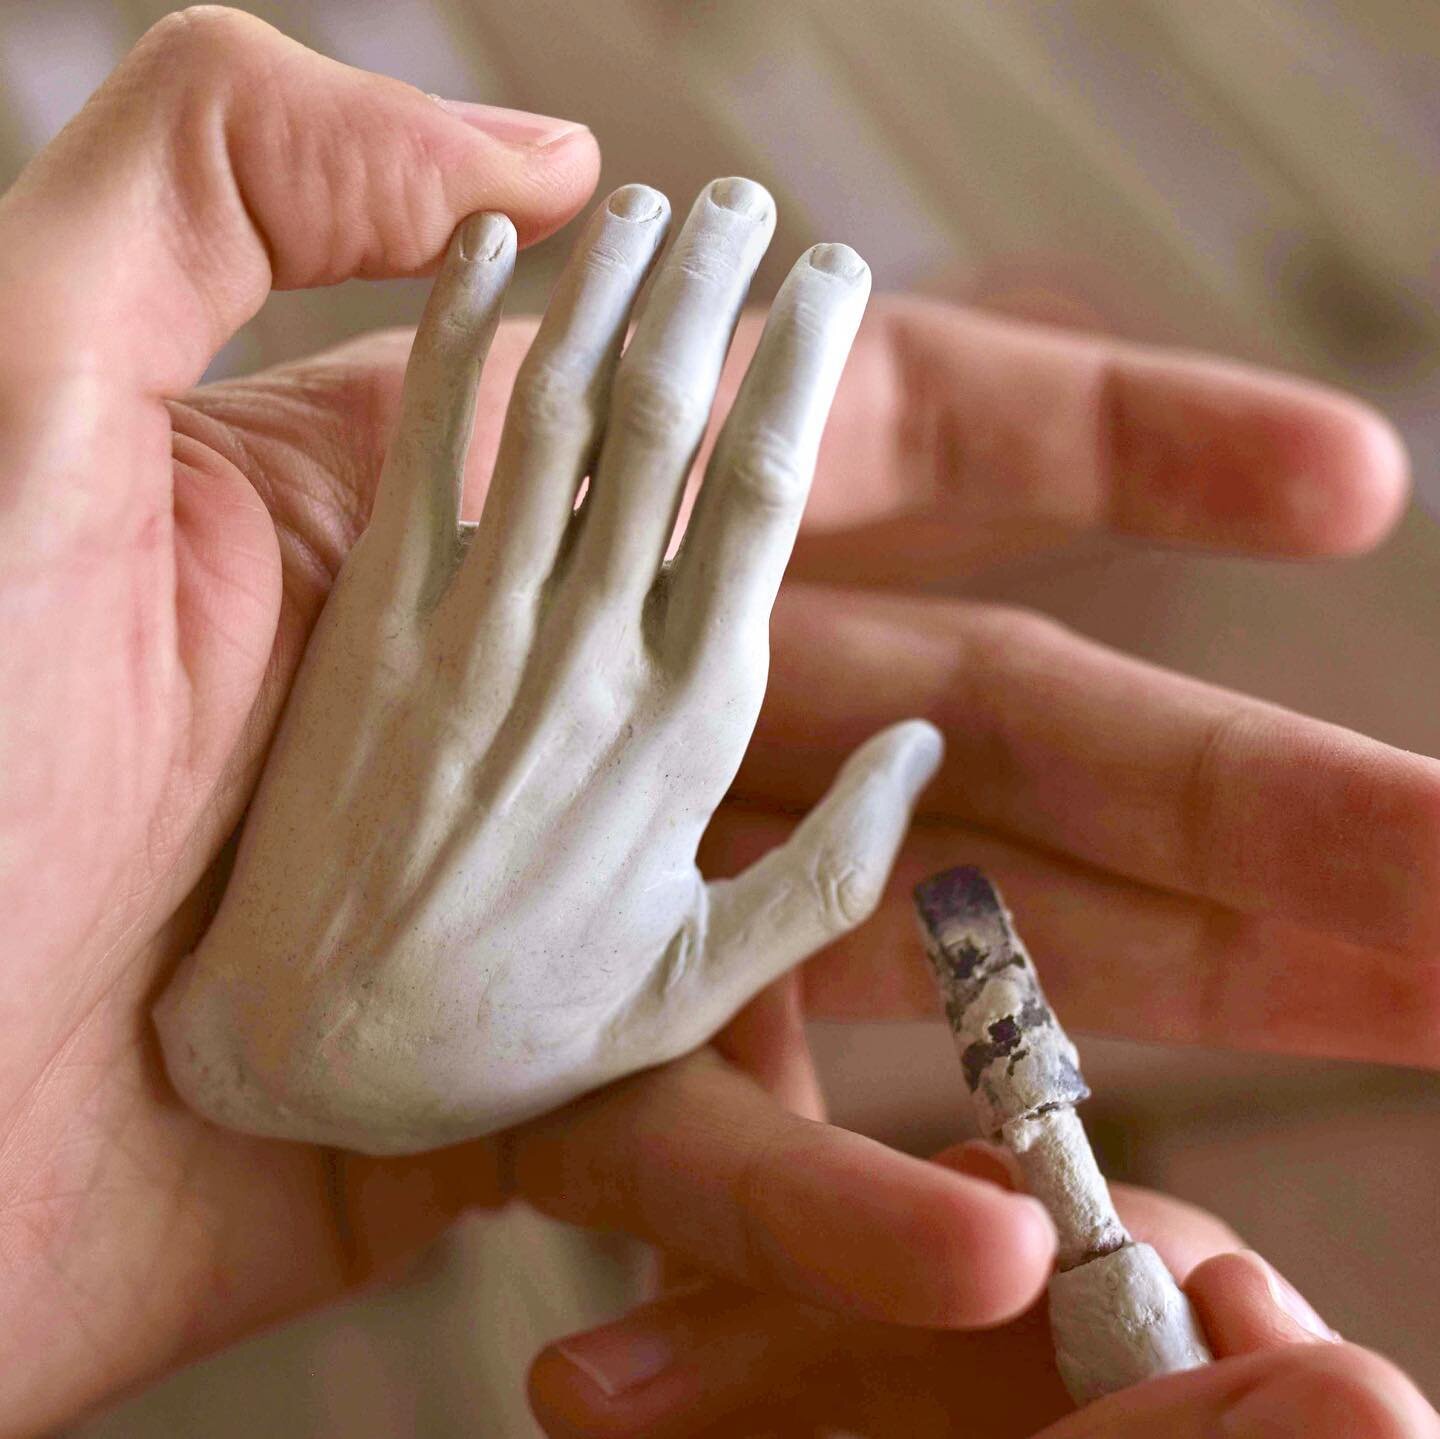 Say hi to the little hand 👋 New in-depth hand sculpting tutorial on my Patreon! Patreon.com/shumakerart  Starting a new sculpture, this time she will be a full body one!! This will take a long time 😵 the hand alone took ages! Swipe to see the palm 